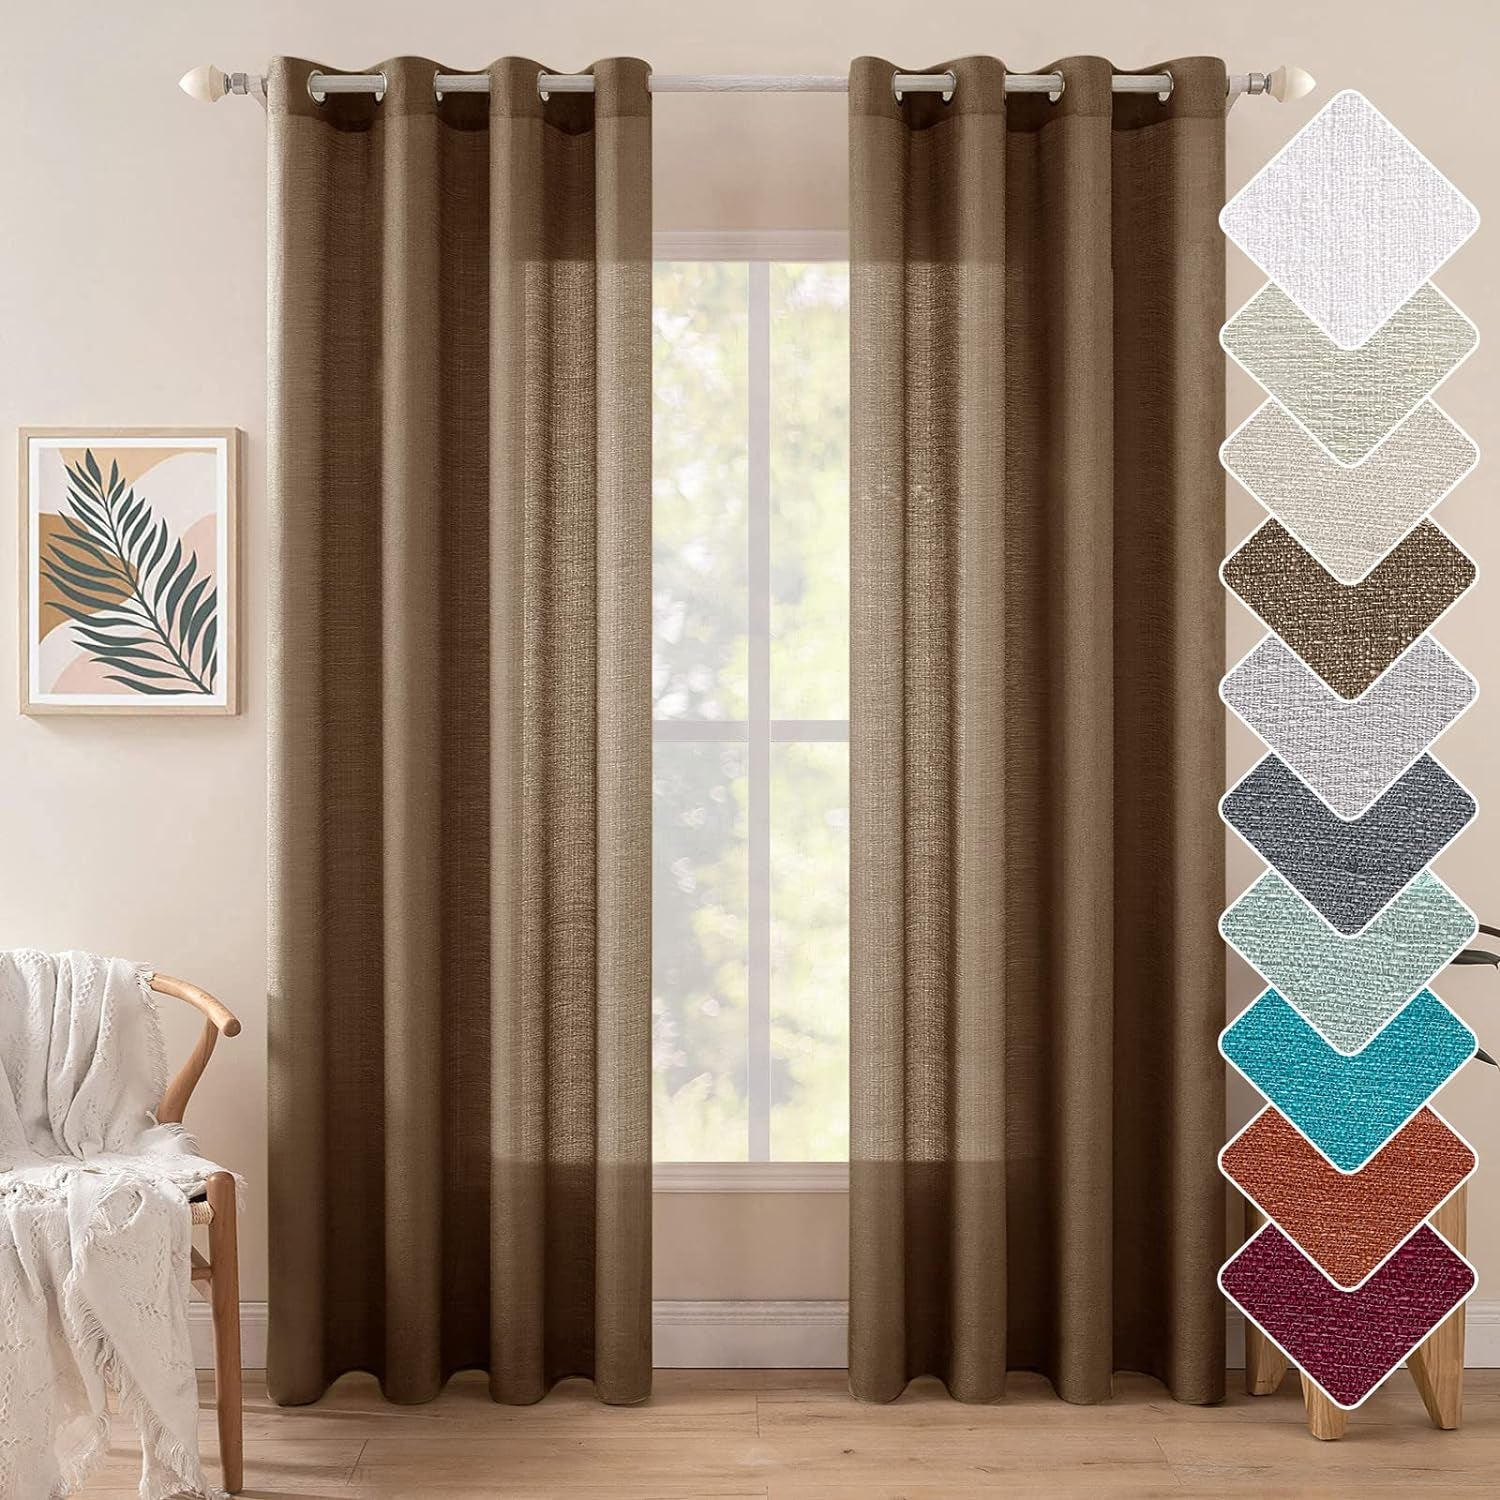 MIULEE Burnt Orange Linen Semi Sheer Curtains 2 Panels for Living Room Bedroom Linen Textured Light Filtering Privacy Window Curtains Terracotta Grommet Drapes Rust Boho Fall Decor W 52 X L 84 Inches  MIULEE Grommet | Chocolate Brown W52 X L96 